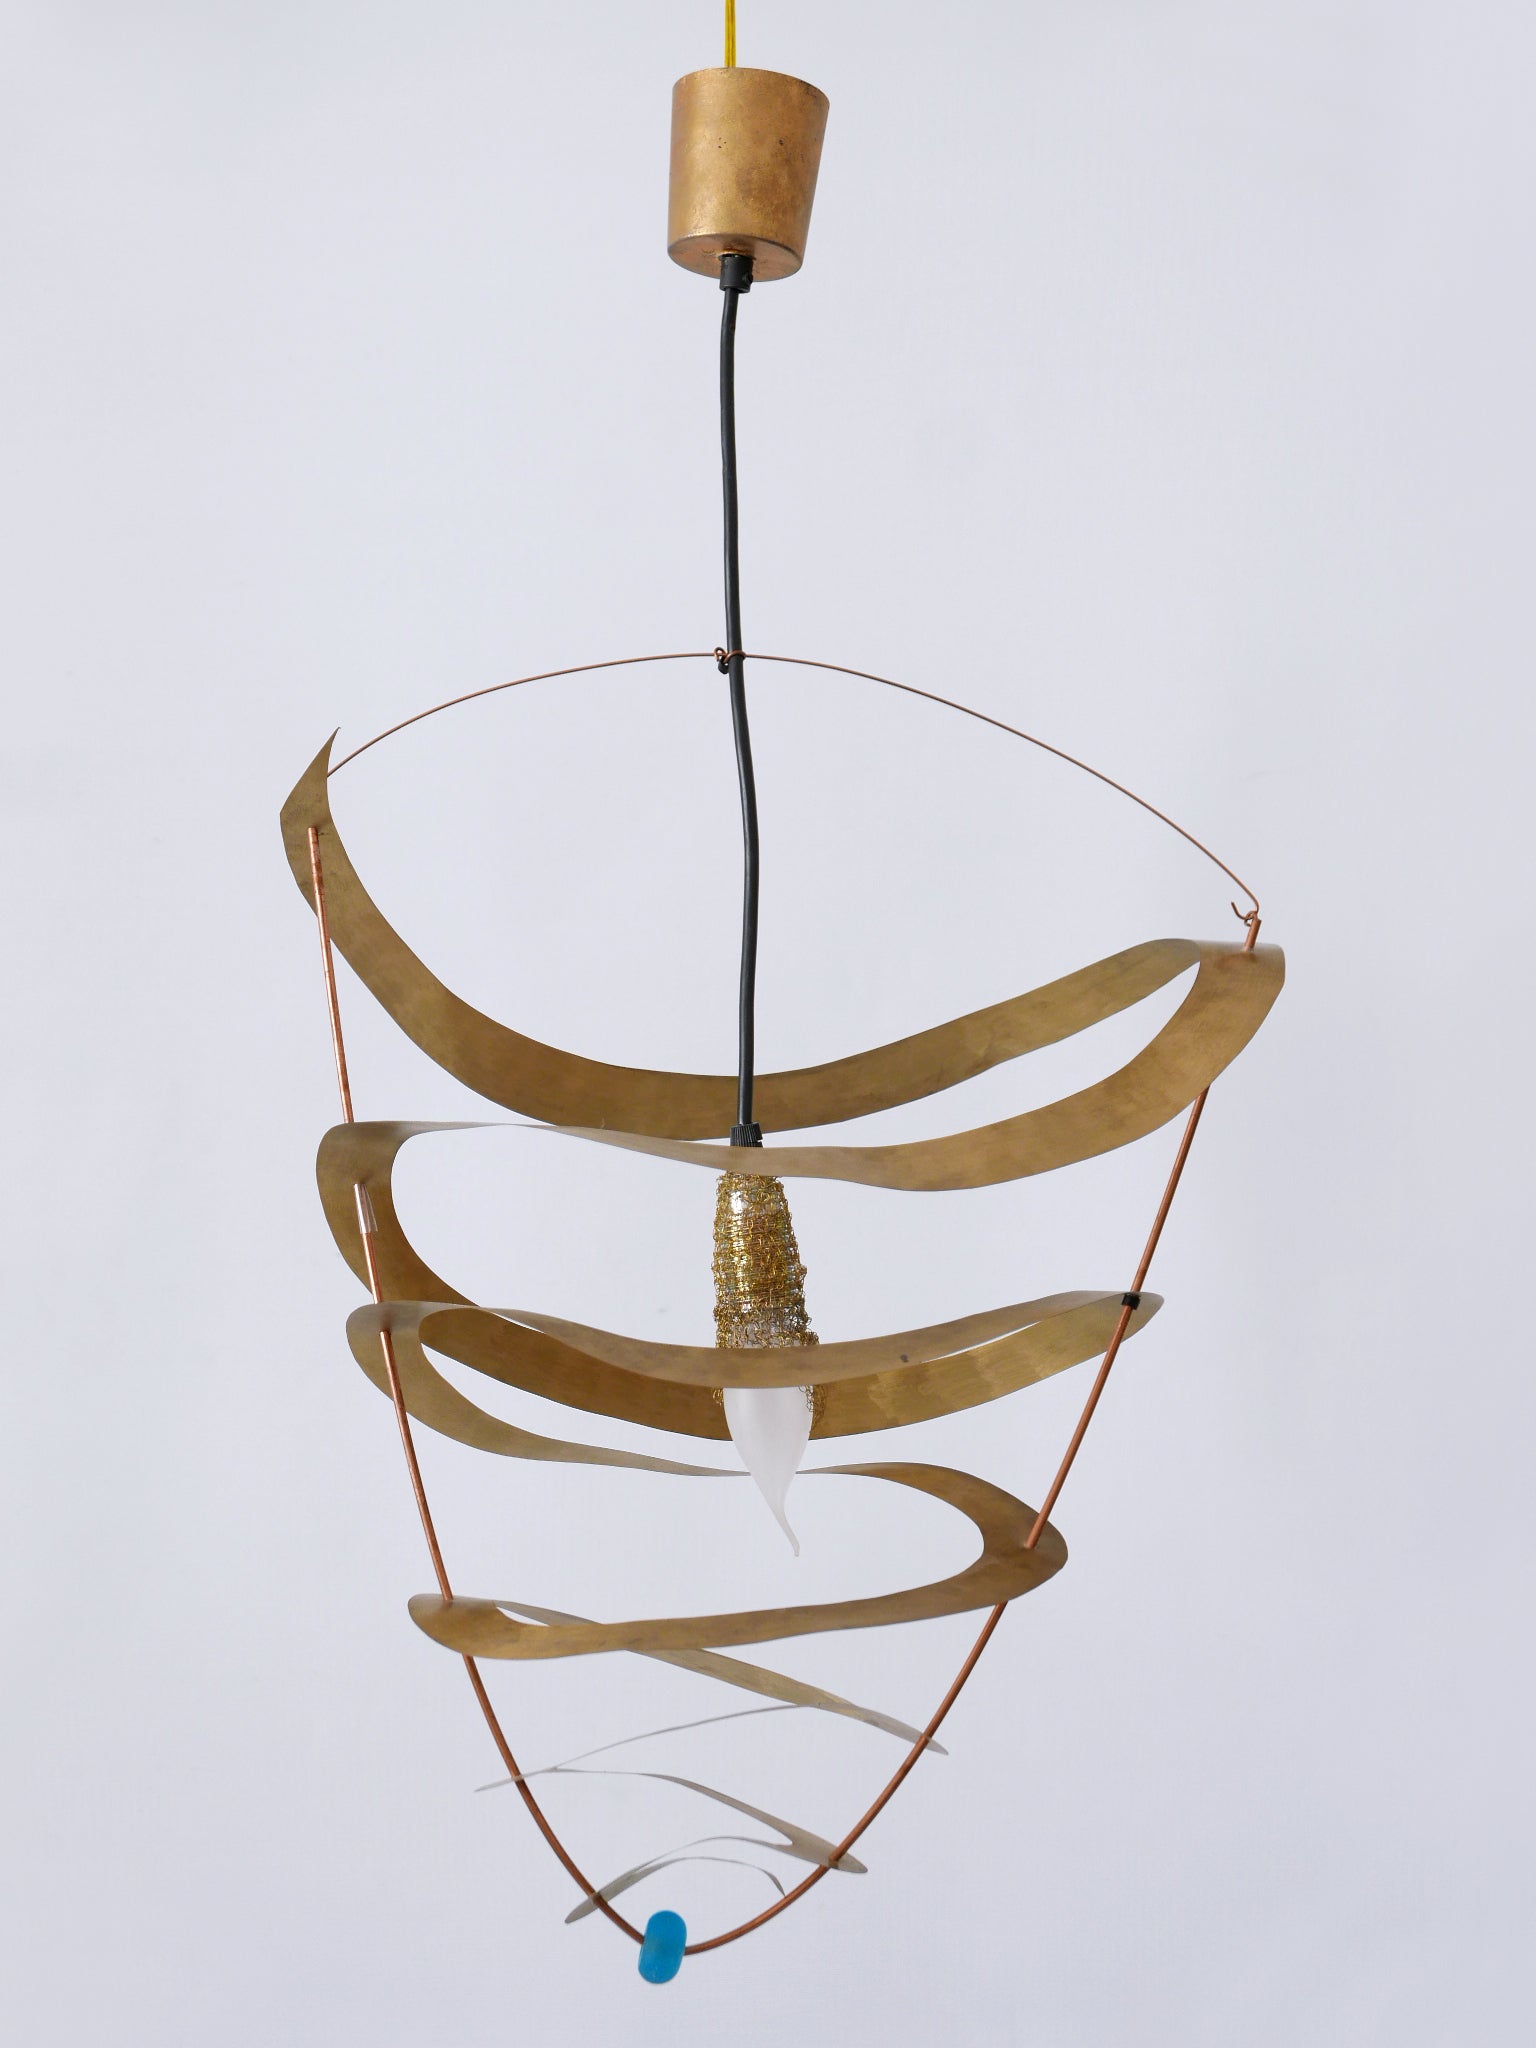 Exceptional and highly decorative postmodern pendant lamp or hanging light. Designed and manufactured probably in Italy, 1980s. Market at the bottom: TALI

Executed in gilt brass and glass, the hanging light or pendant lamp has 1 x E14 / E12 Edison